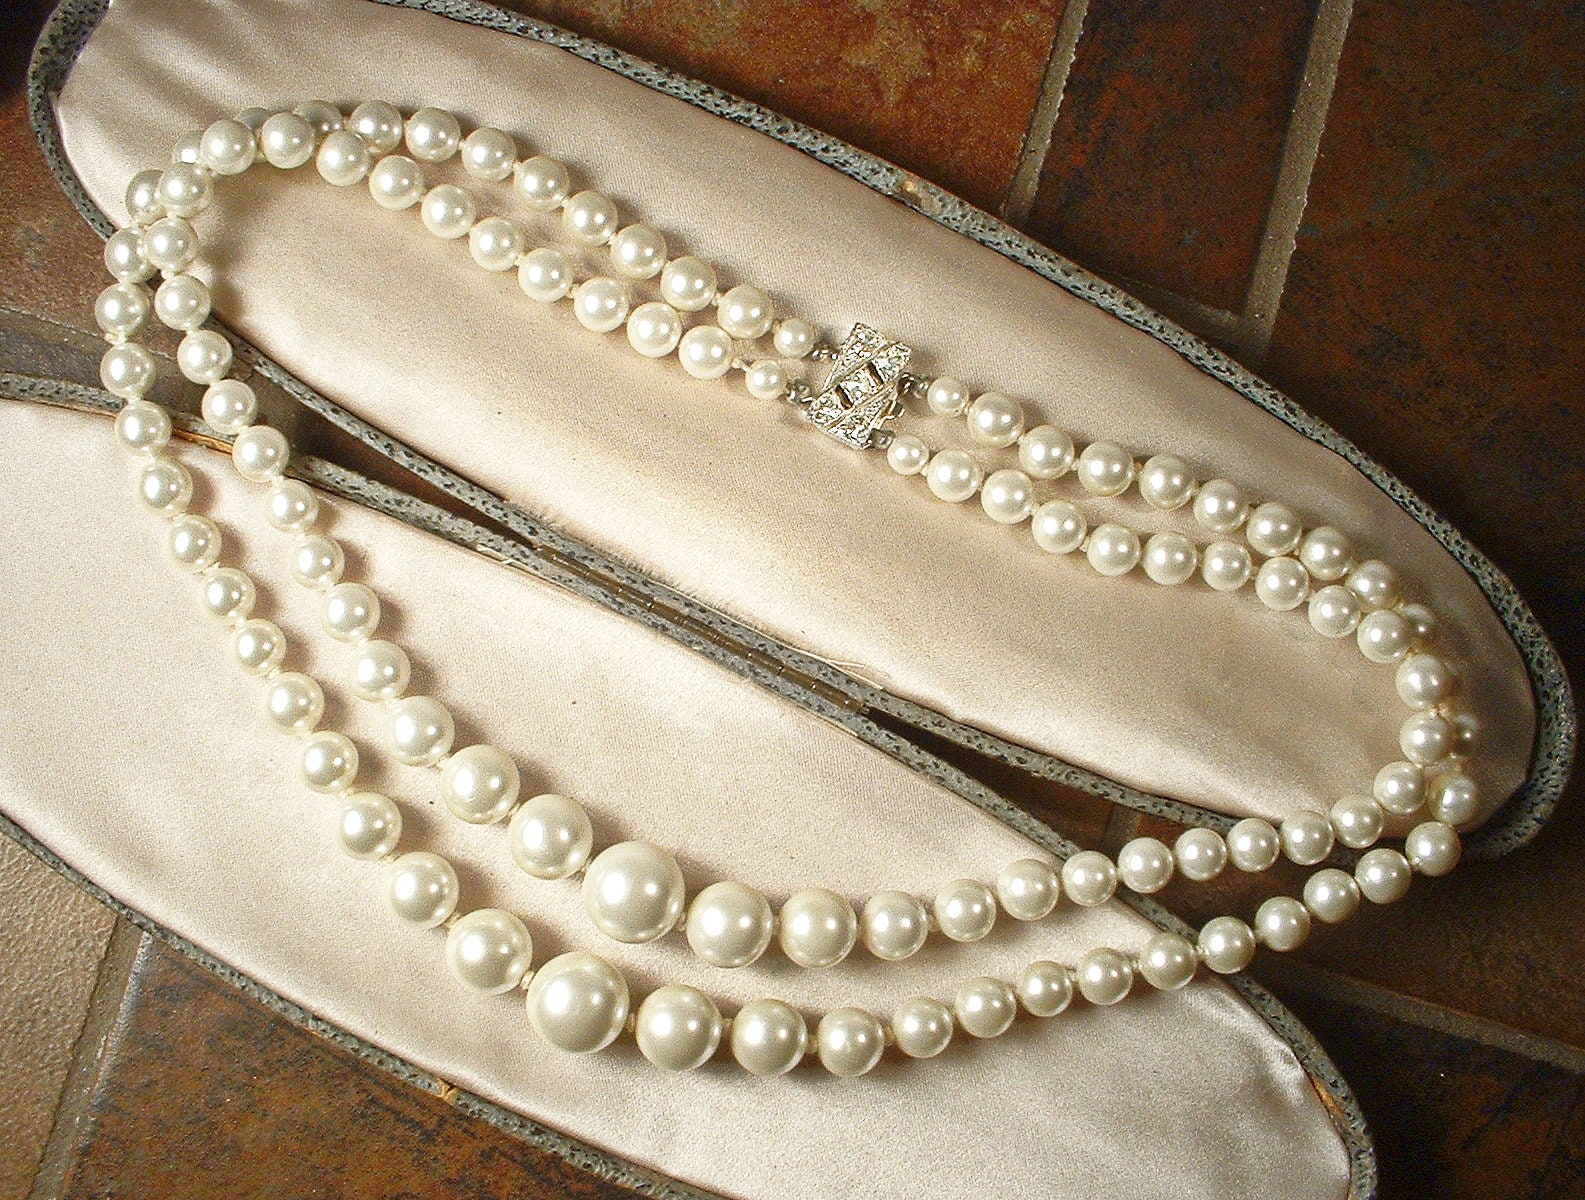 Vintage Chanel Double Strand Pearl and Bow Station Necklace, 2006